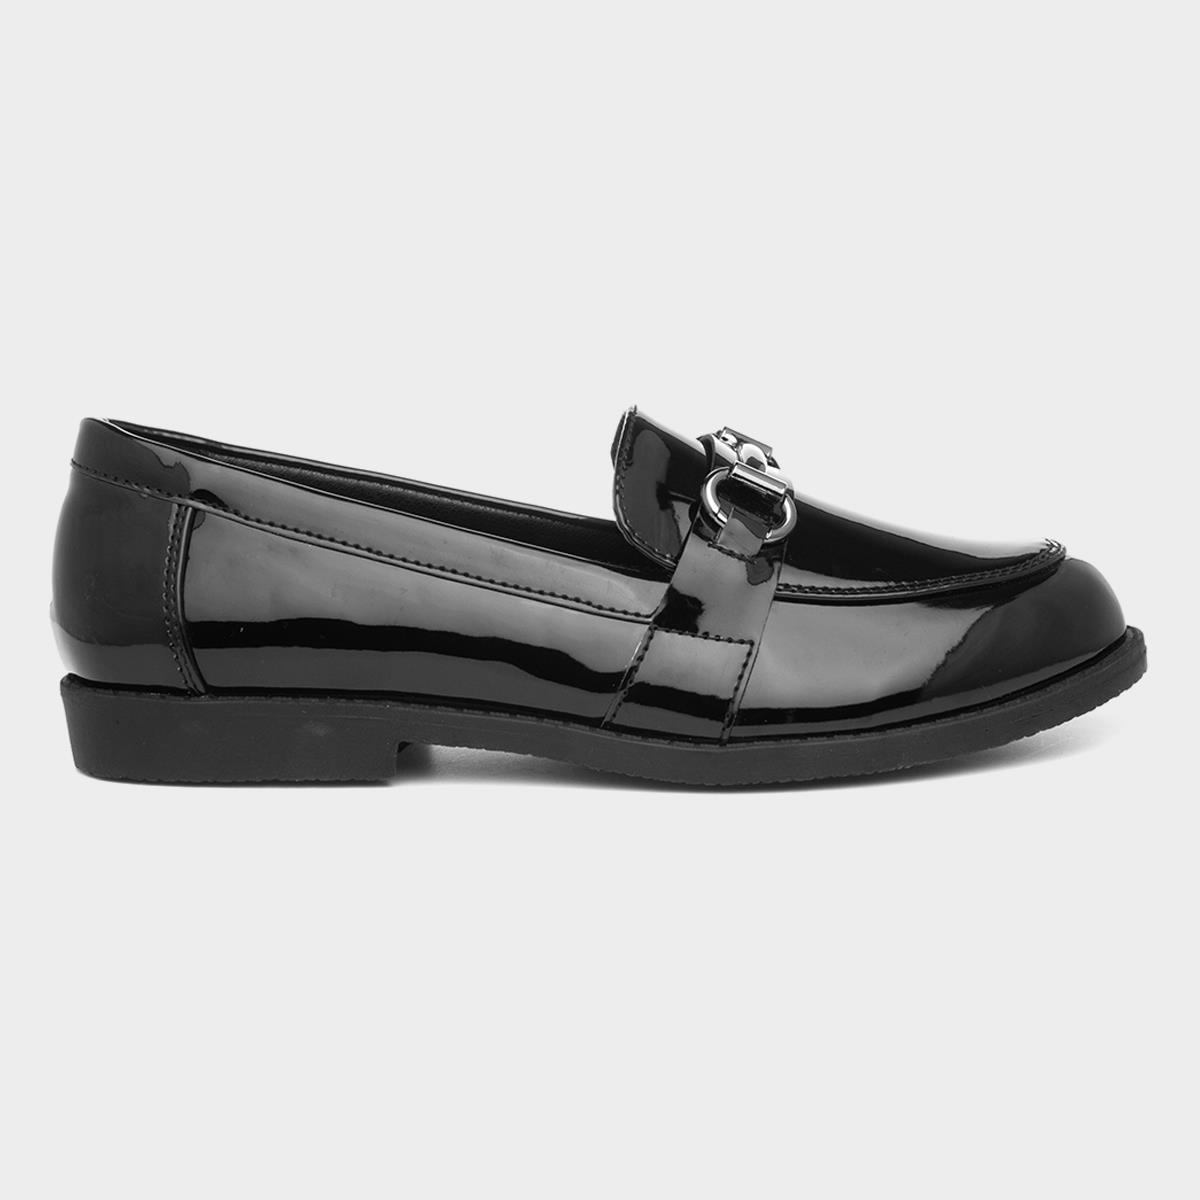 Lilley Womens Patent Loafer in Black-15041 | Shoe Zone